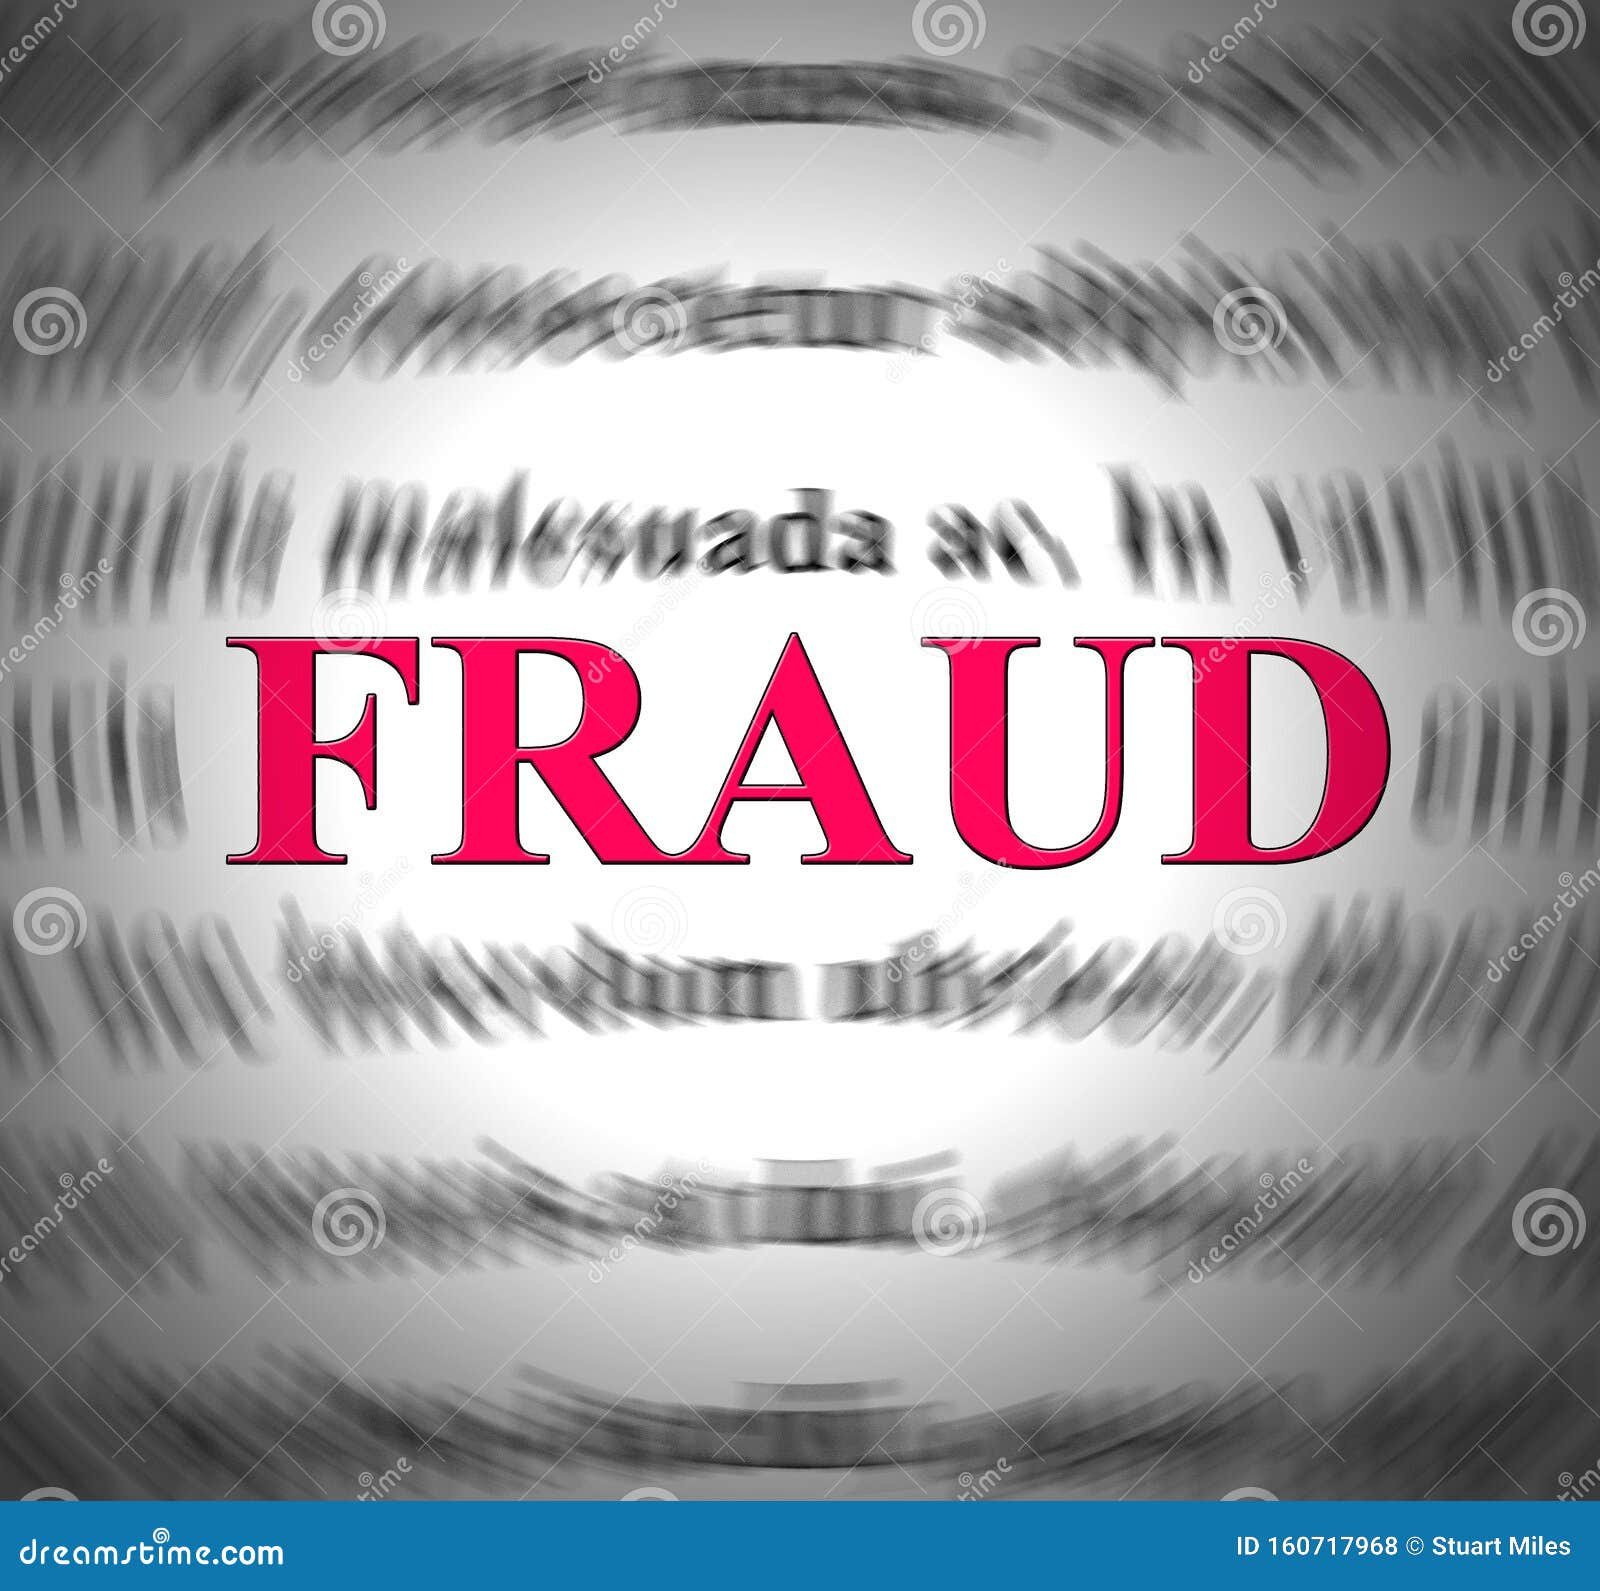 fraud or trickster means a con artist who will swindle customers - 3d 